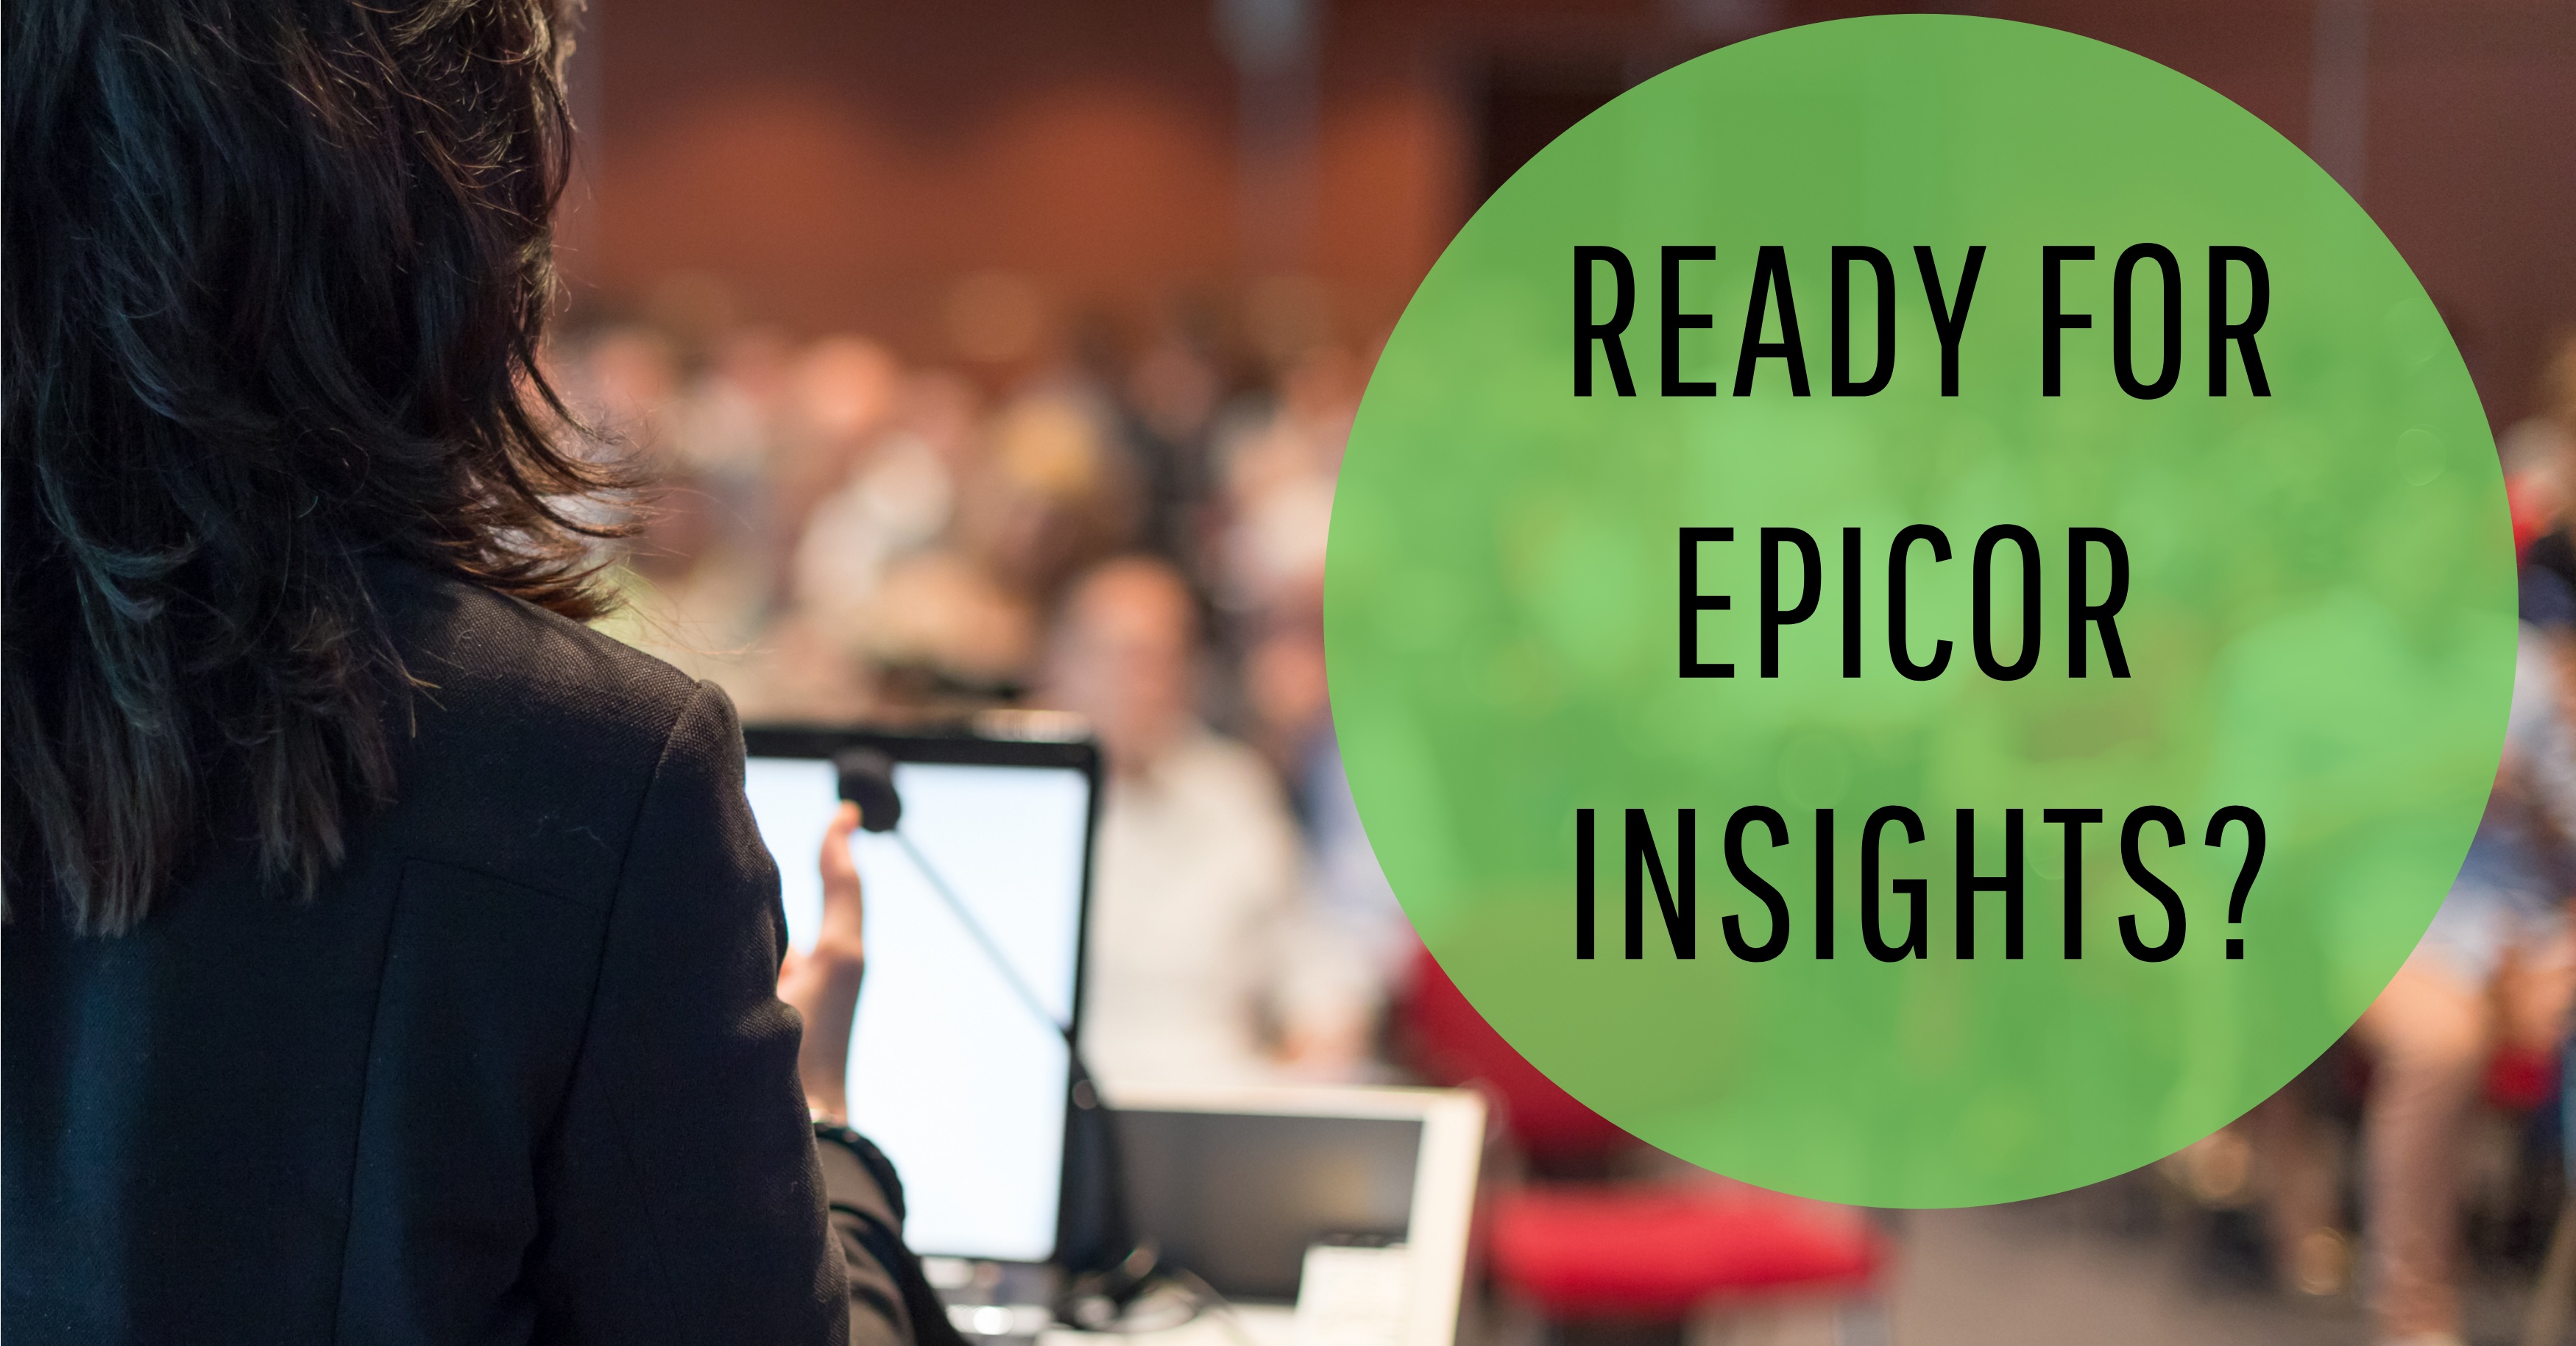 Ready for Epicor Insights?